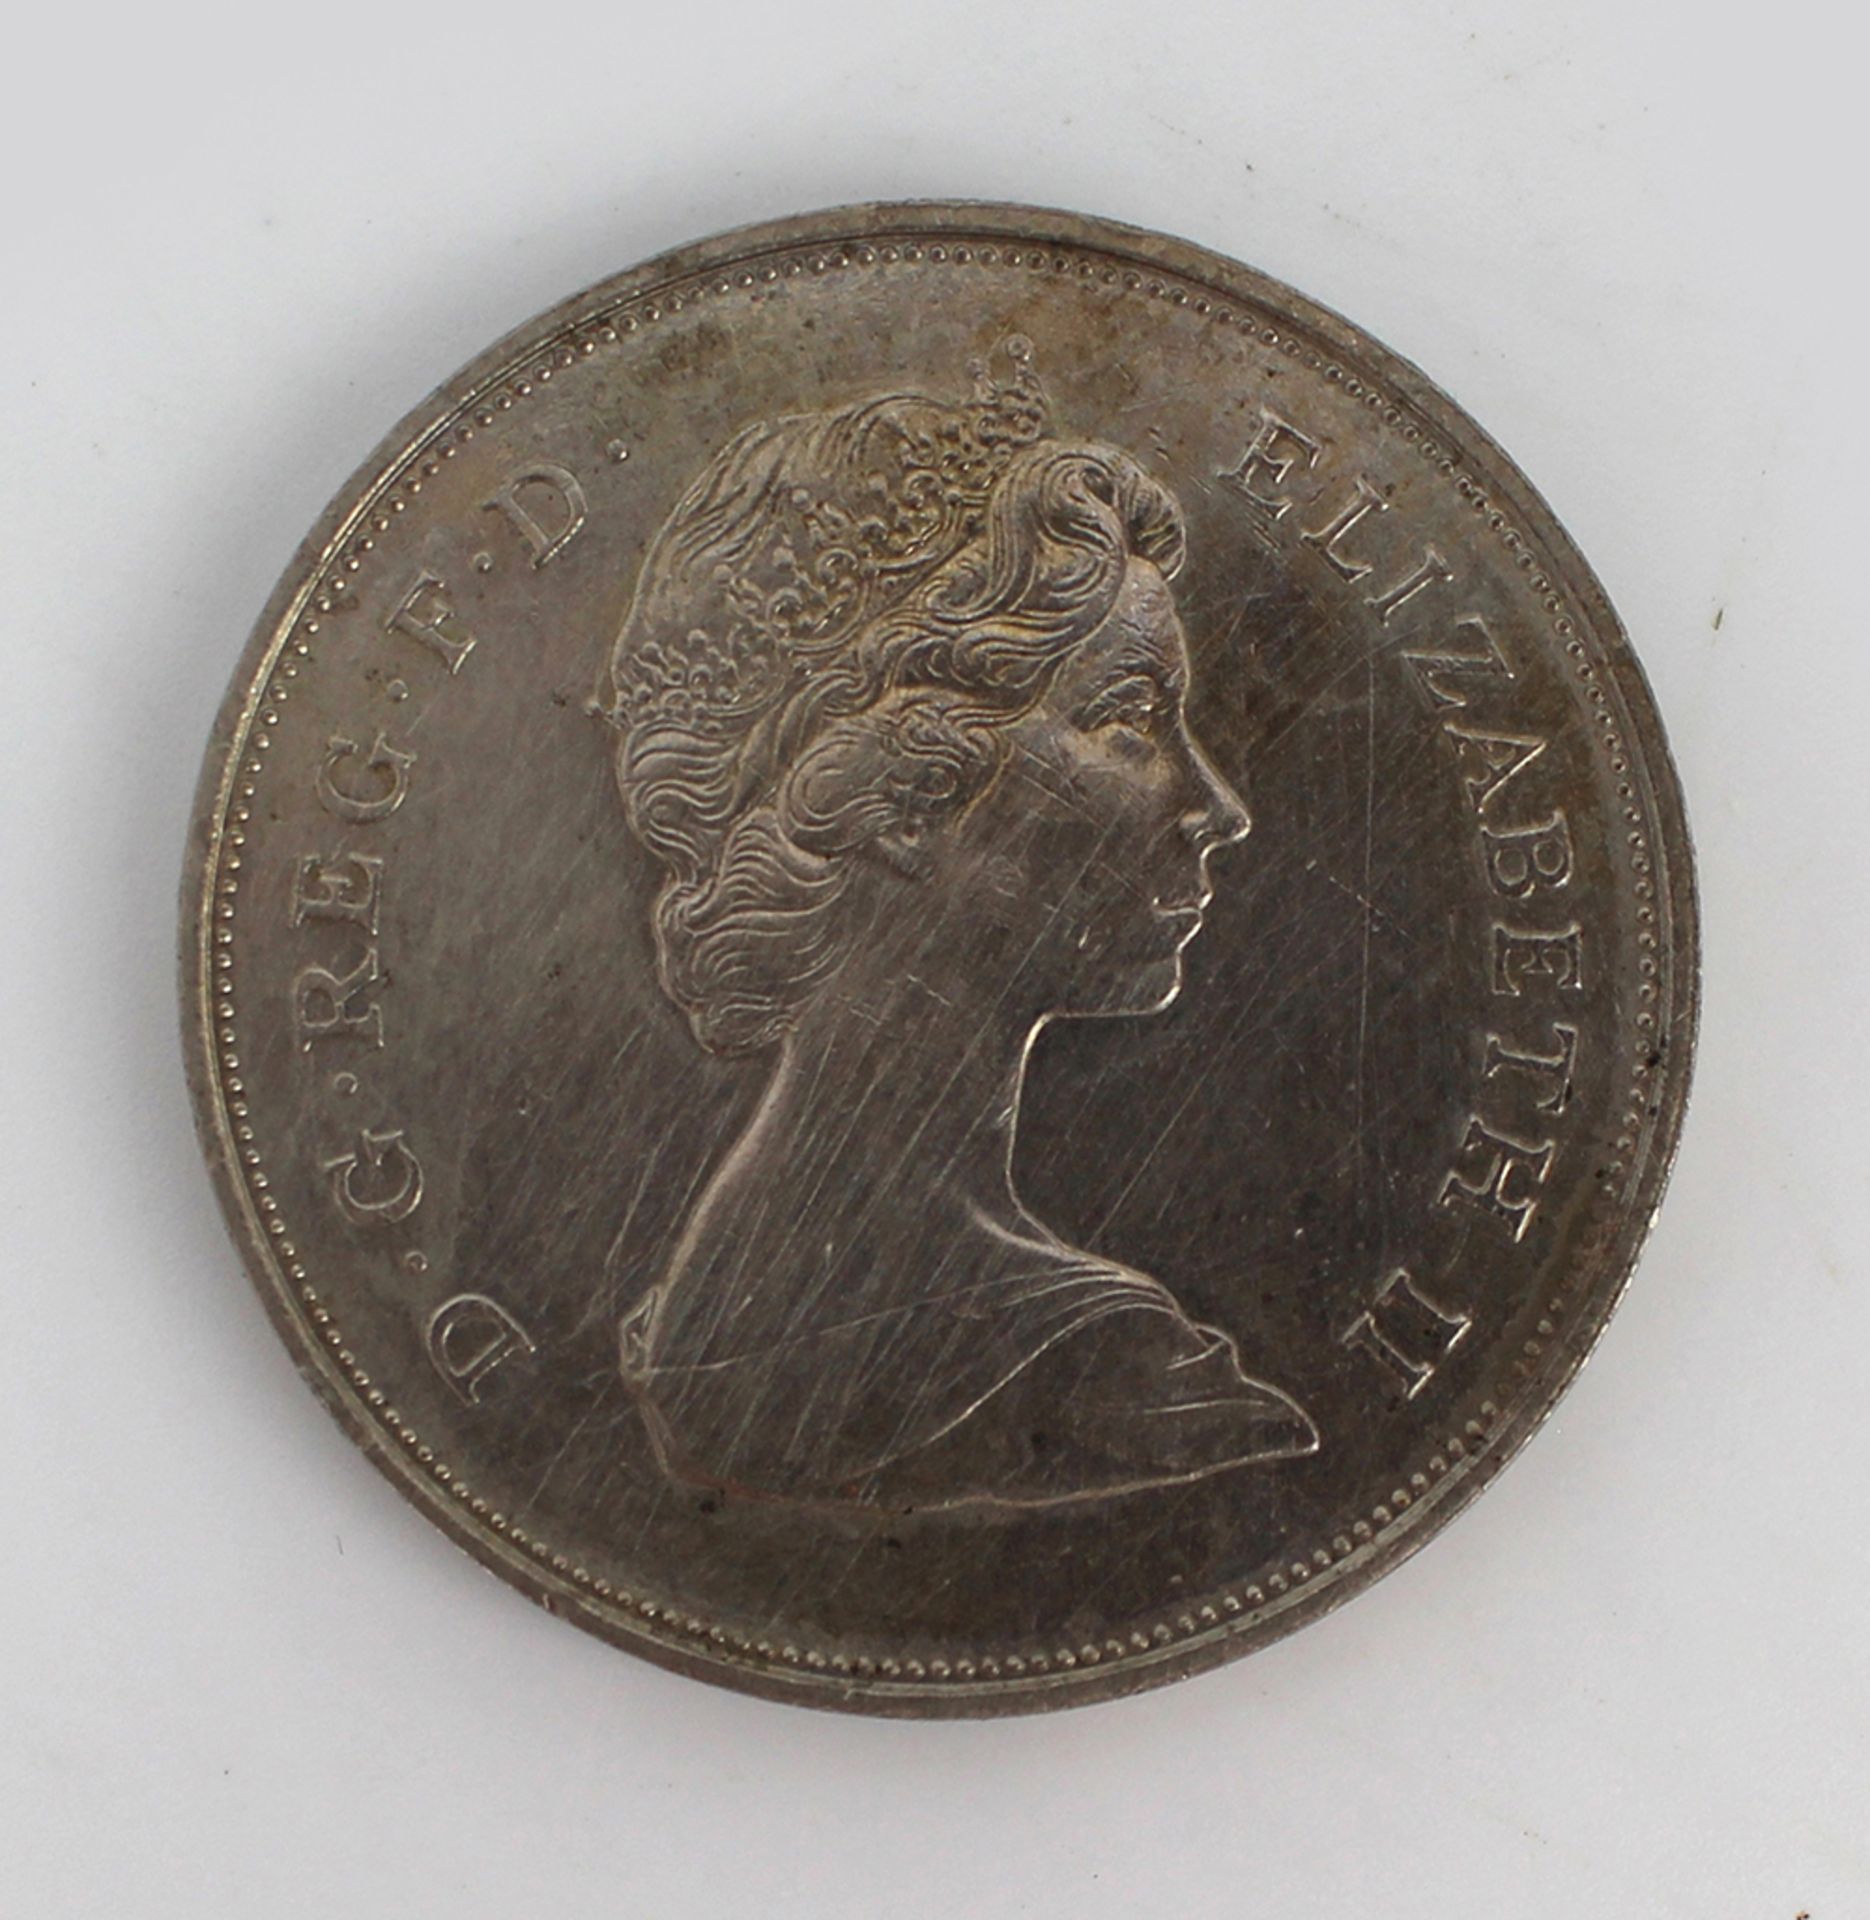 Prince of Wales & Lady Diana Spencer 1981 Coin - Image 2 of 2